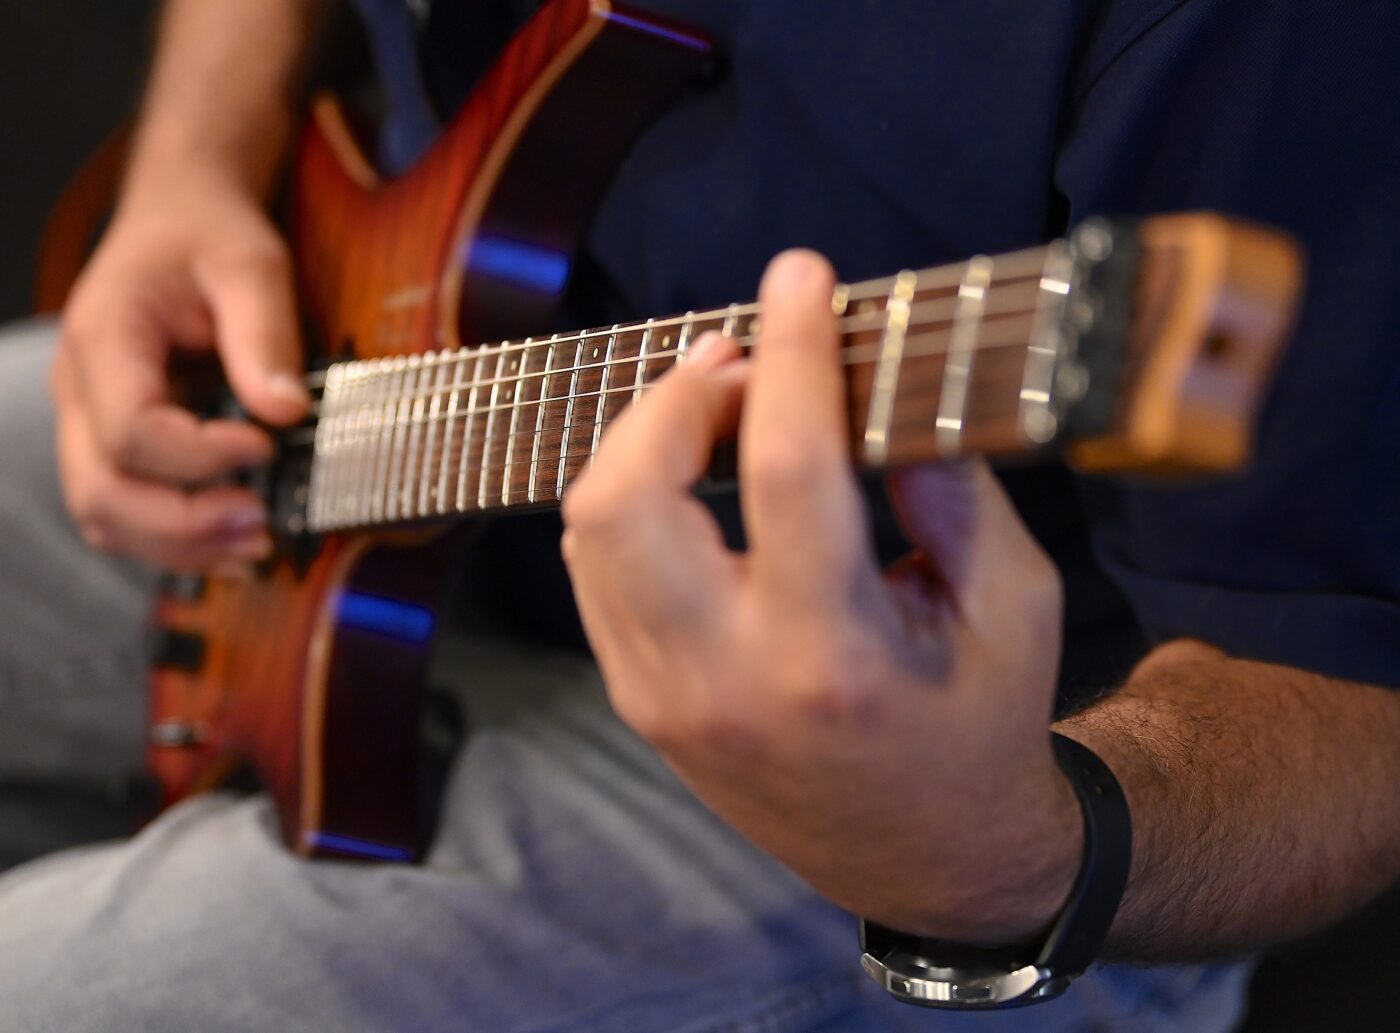 A close up photo of hands playing an electric guitar.